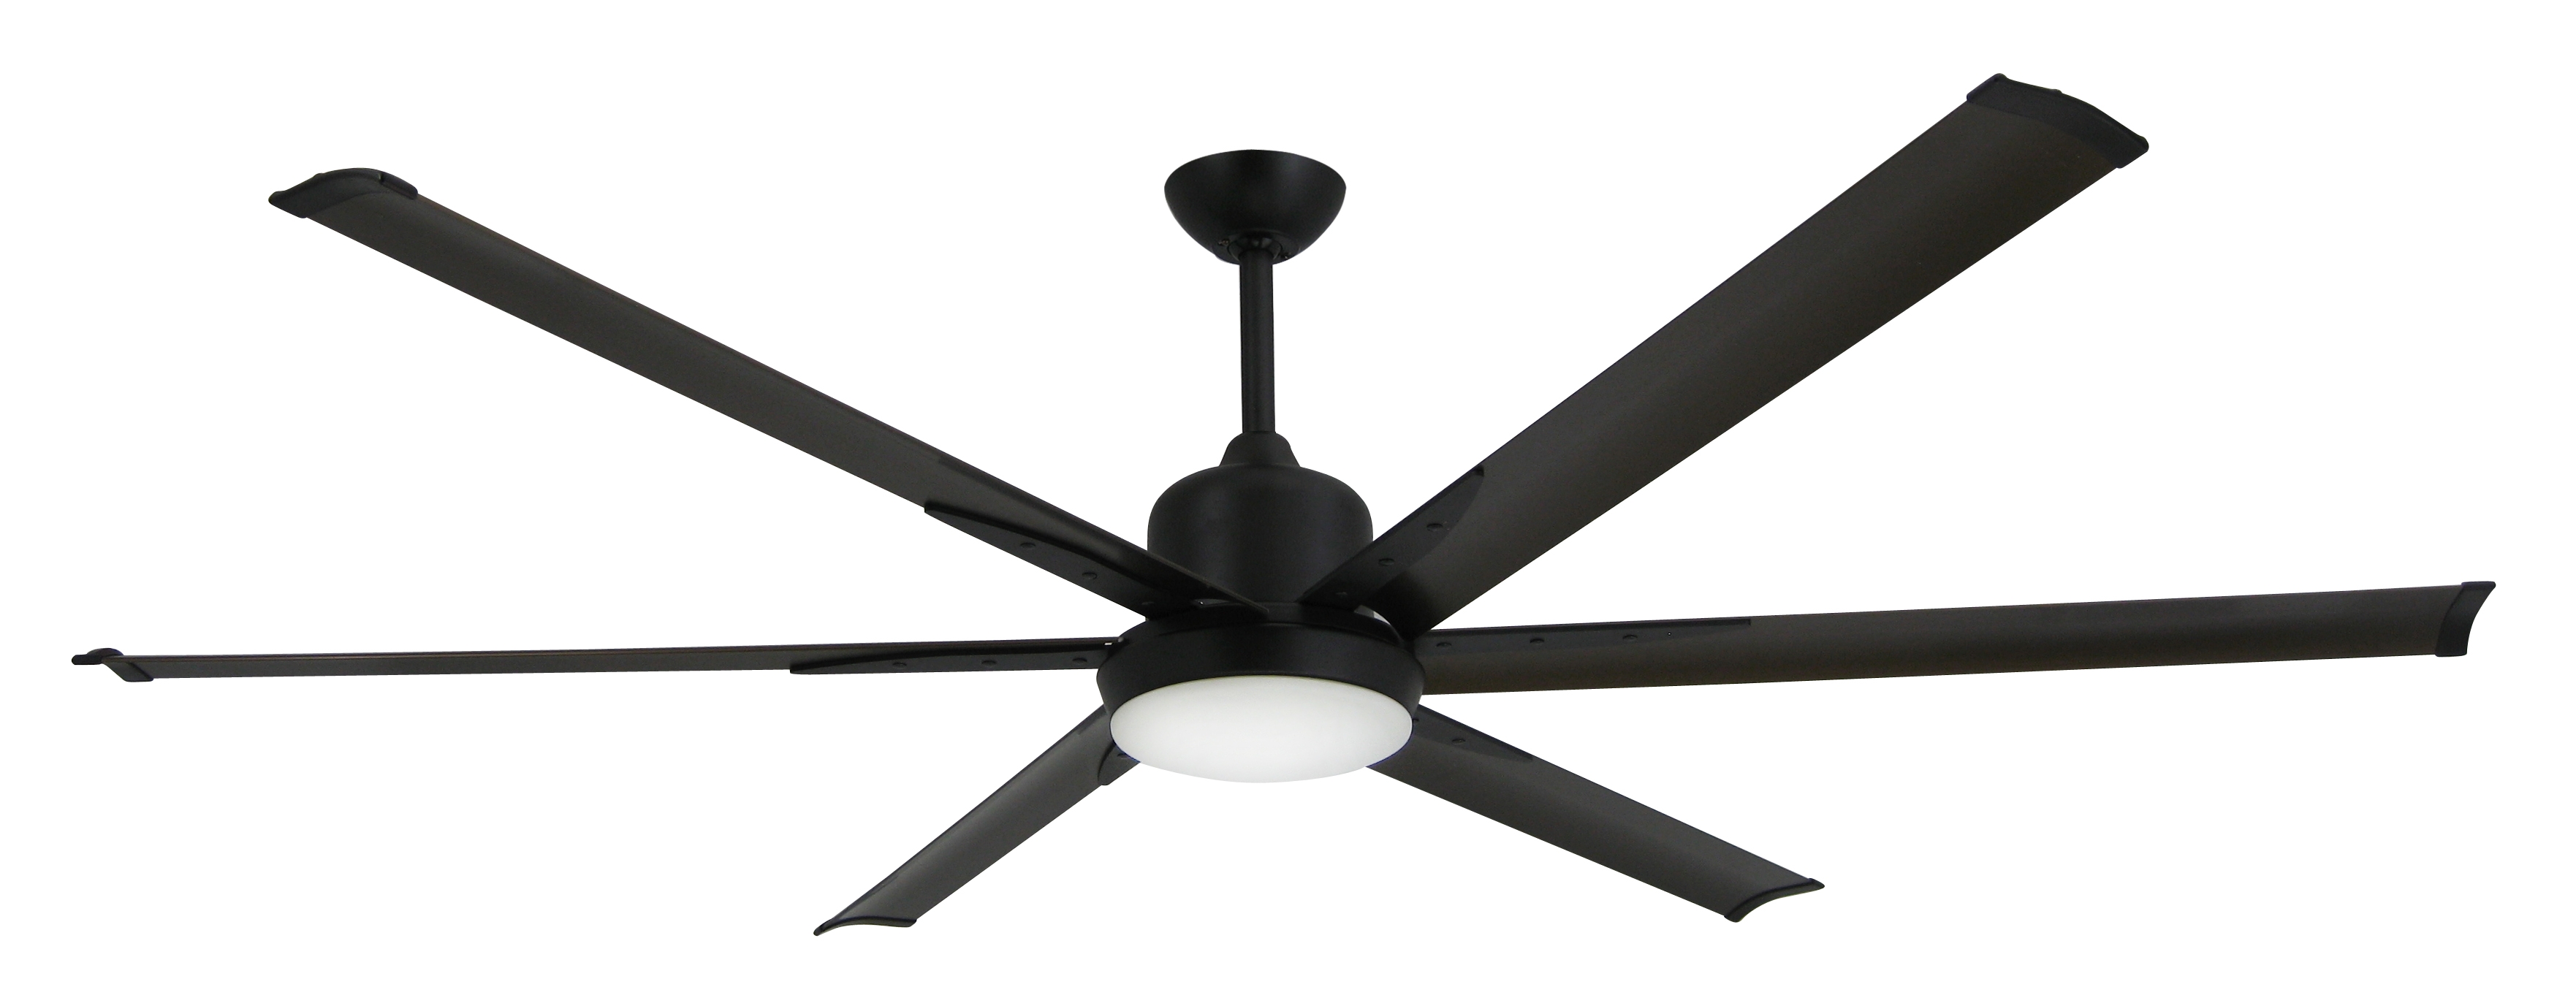 Permalink to Large Outdoor Ceiling Fan With Light